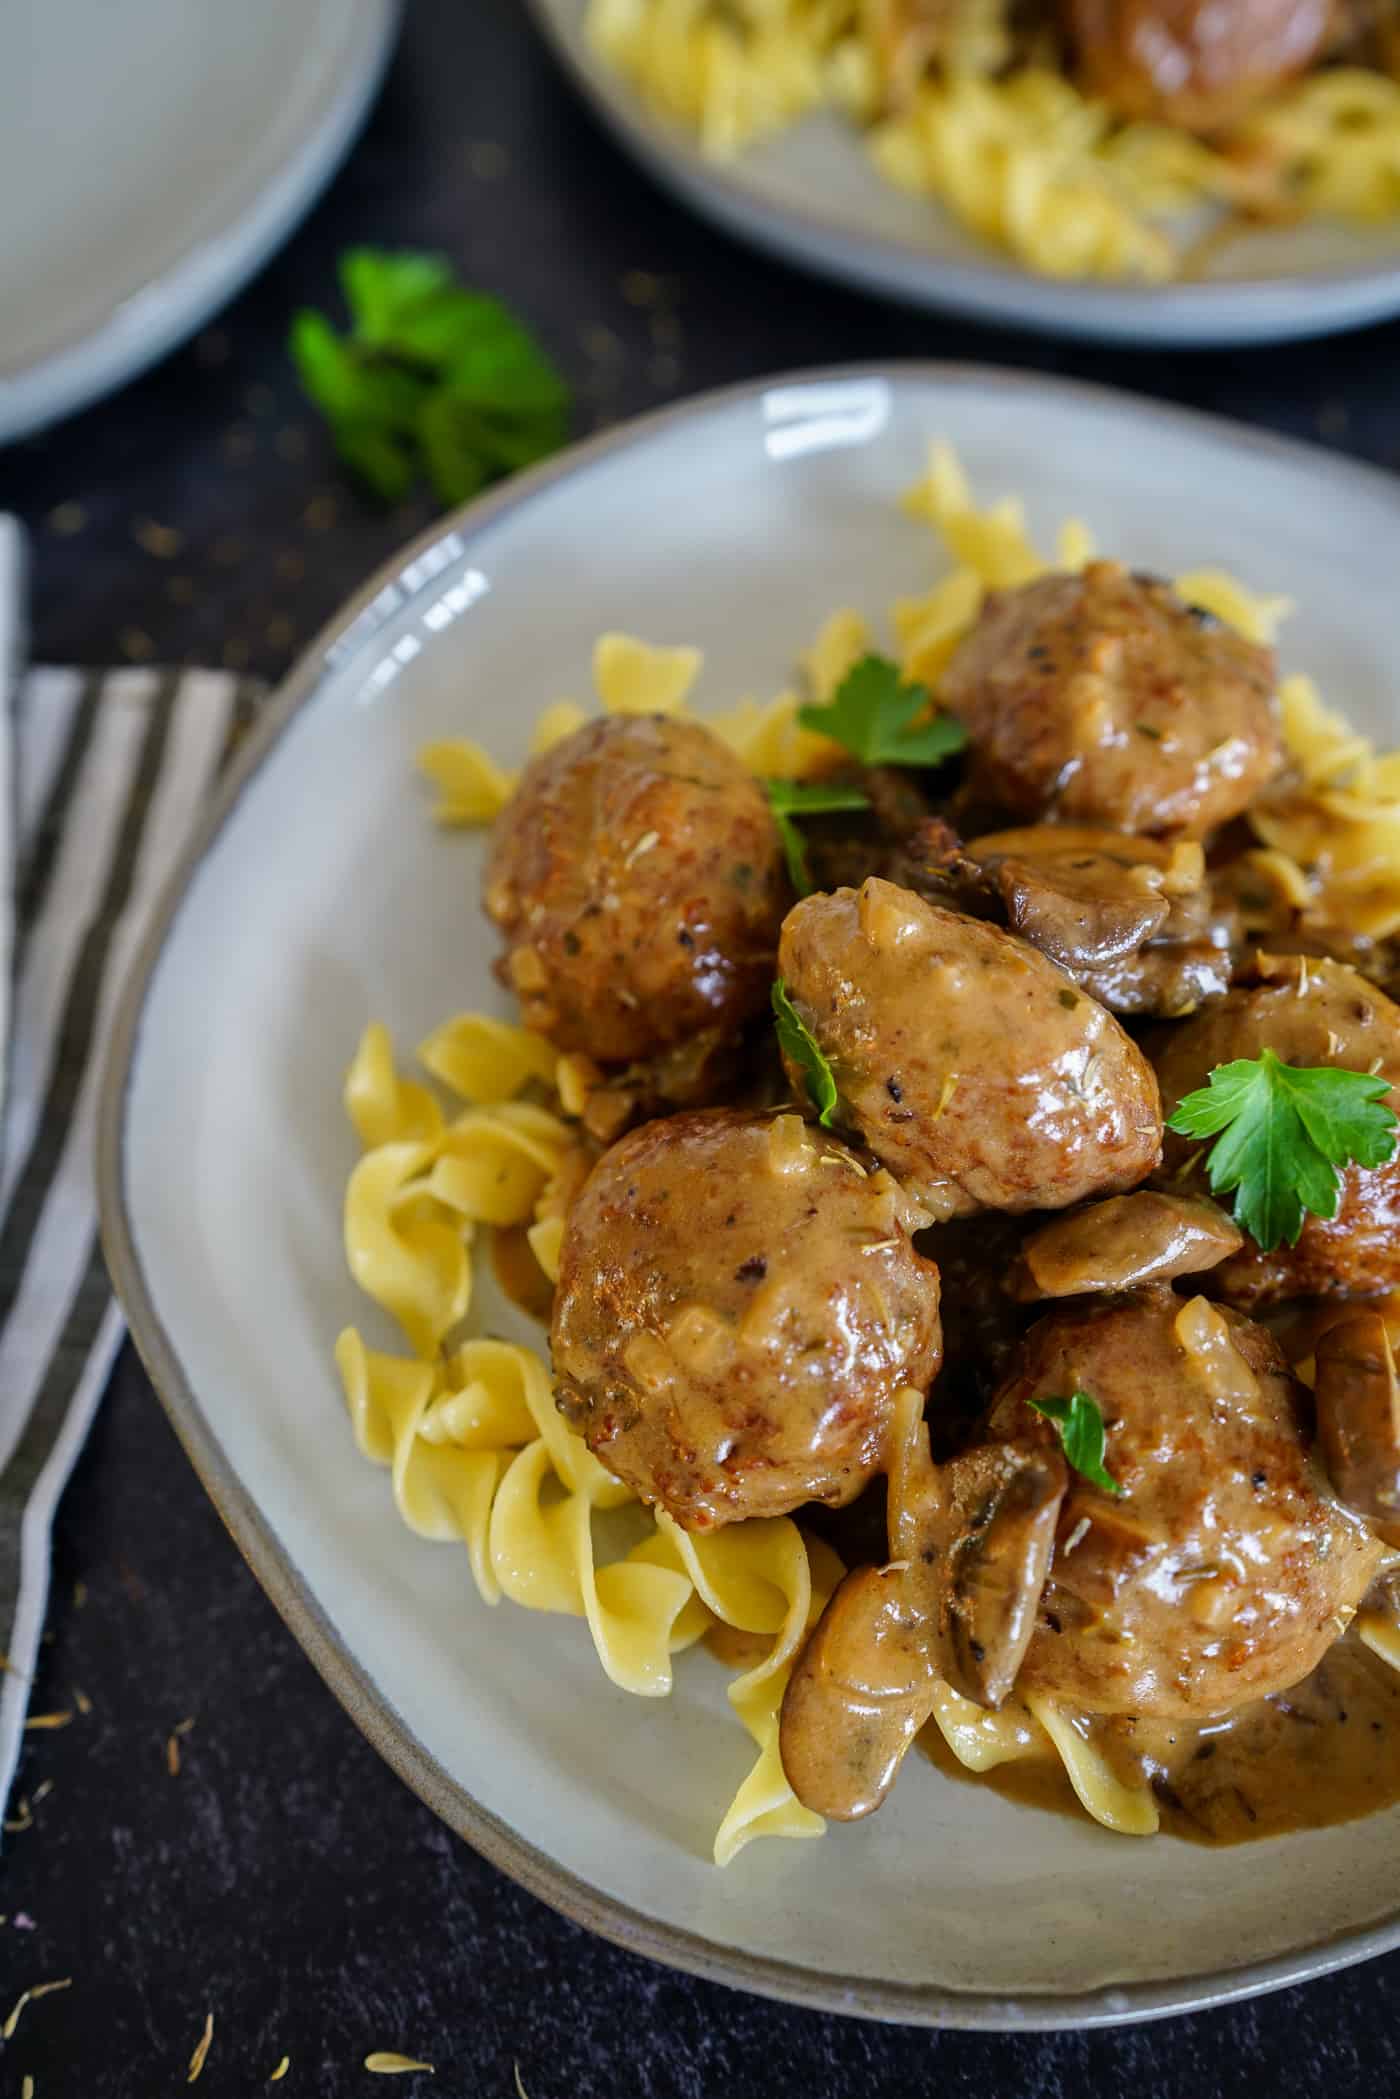 A Lily Love Affaire shares a recipe for meatball stroganoff served over egg noodles with mushroom gravy sauce